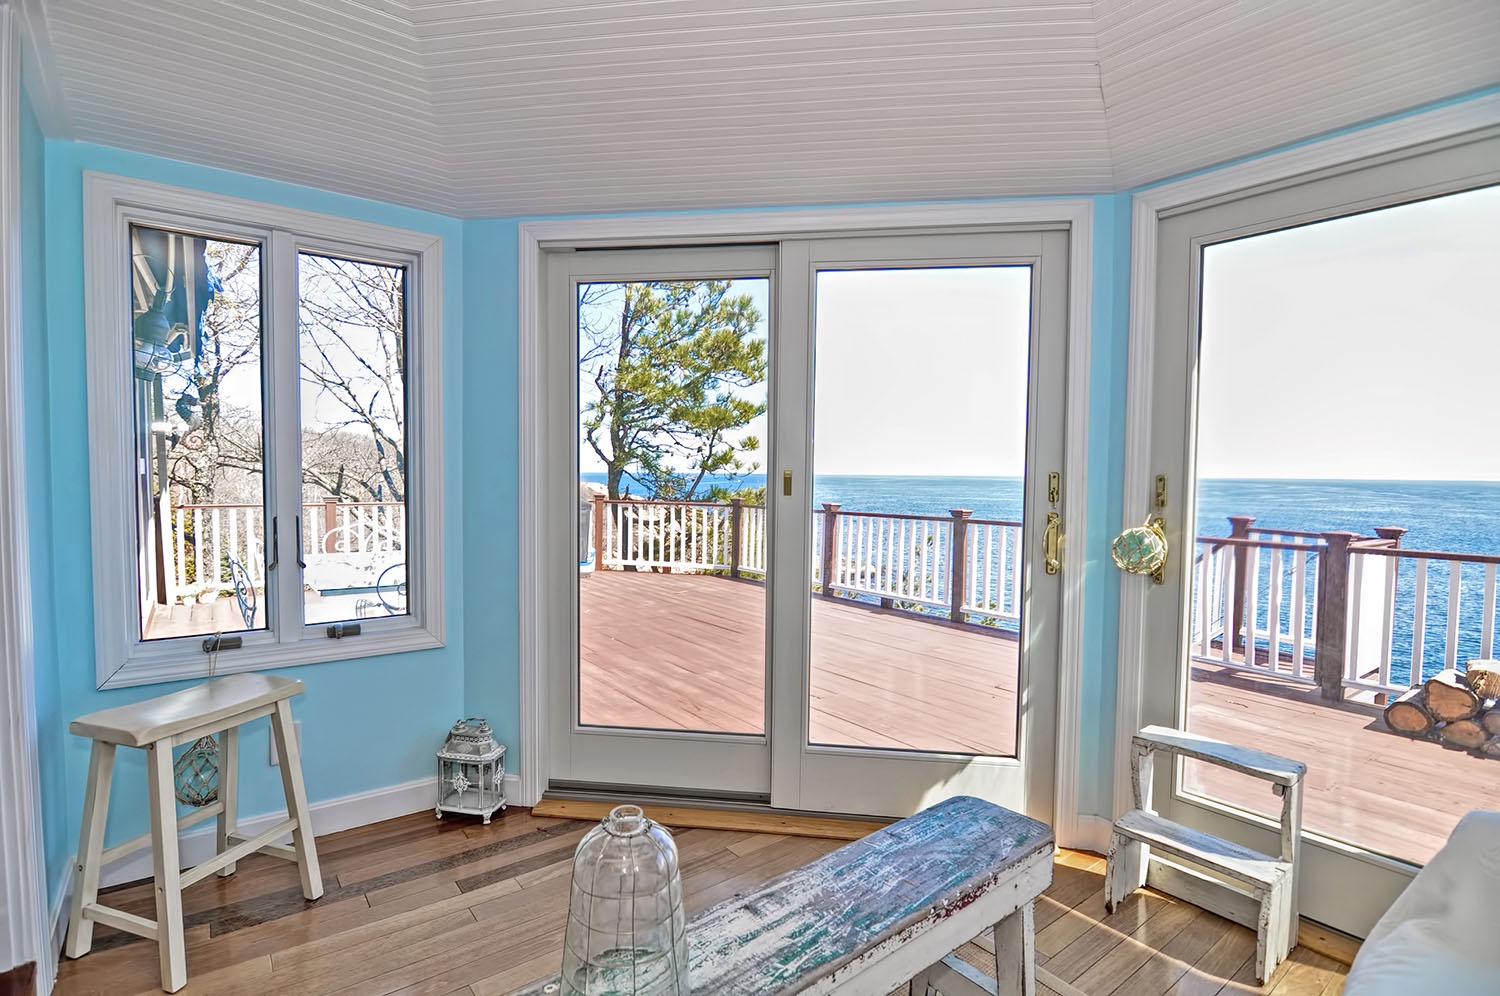 The back deck can be accessed via the sun room.